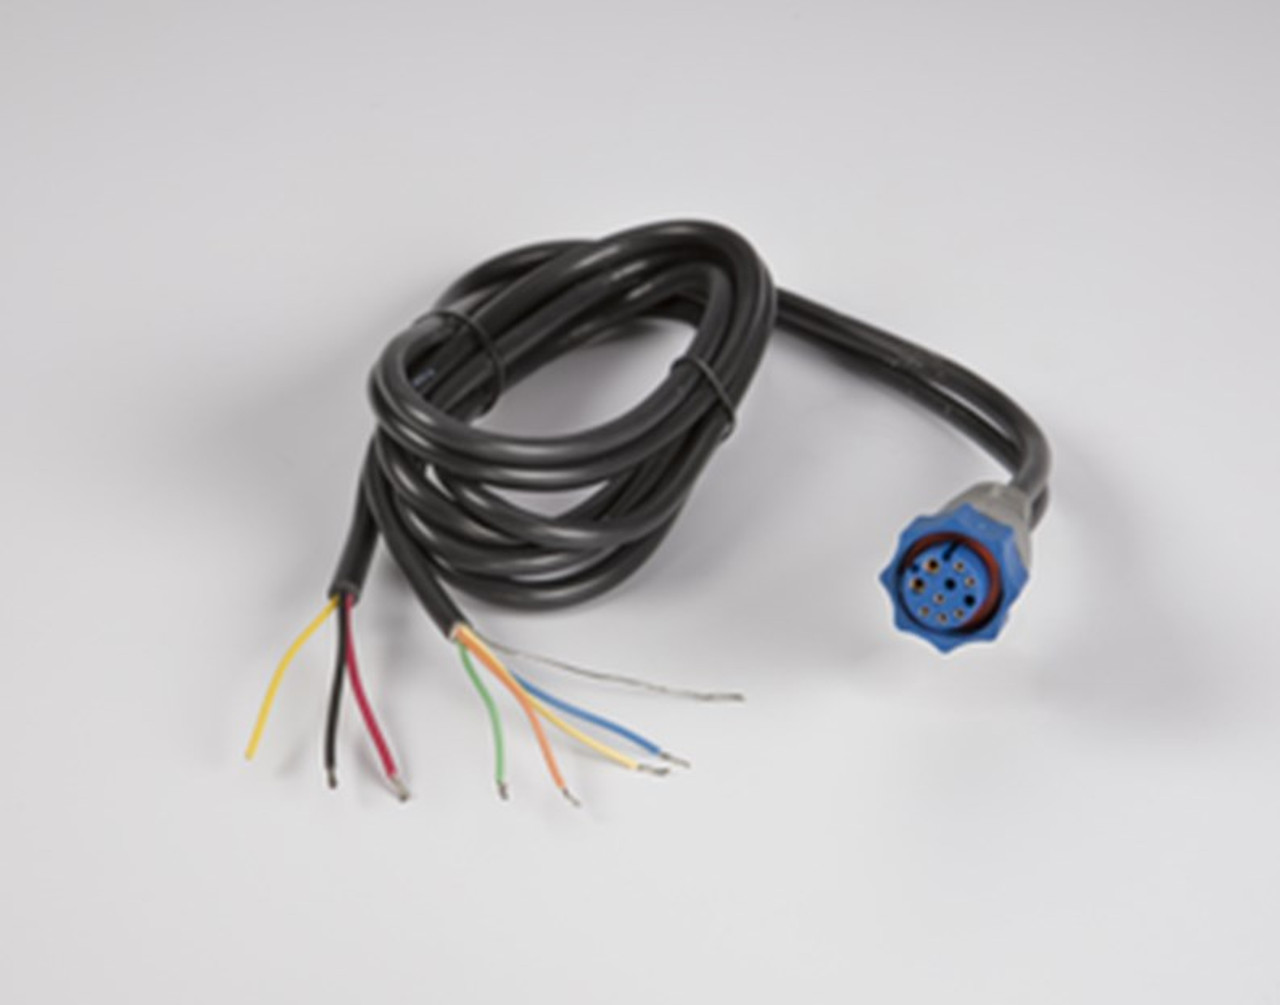 000-14041-001 HDS / Elite / Hook Power Cable 3 Foot, 2-Wire Power